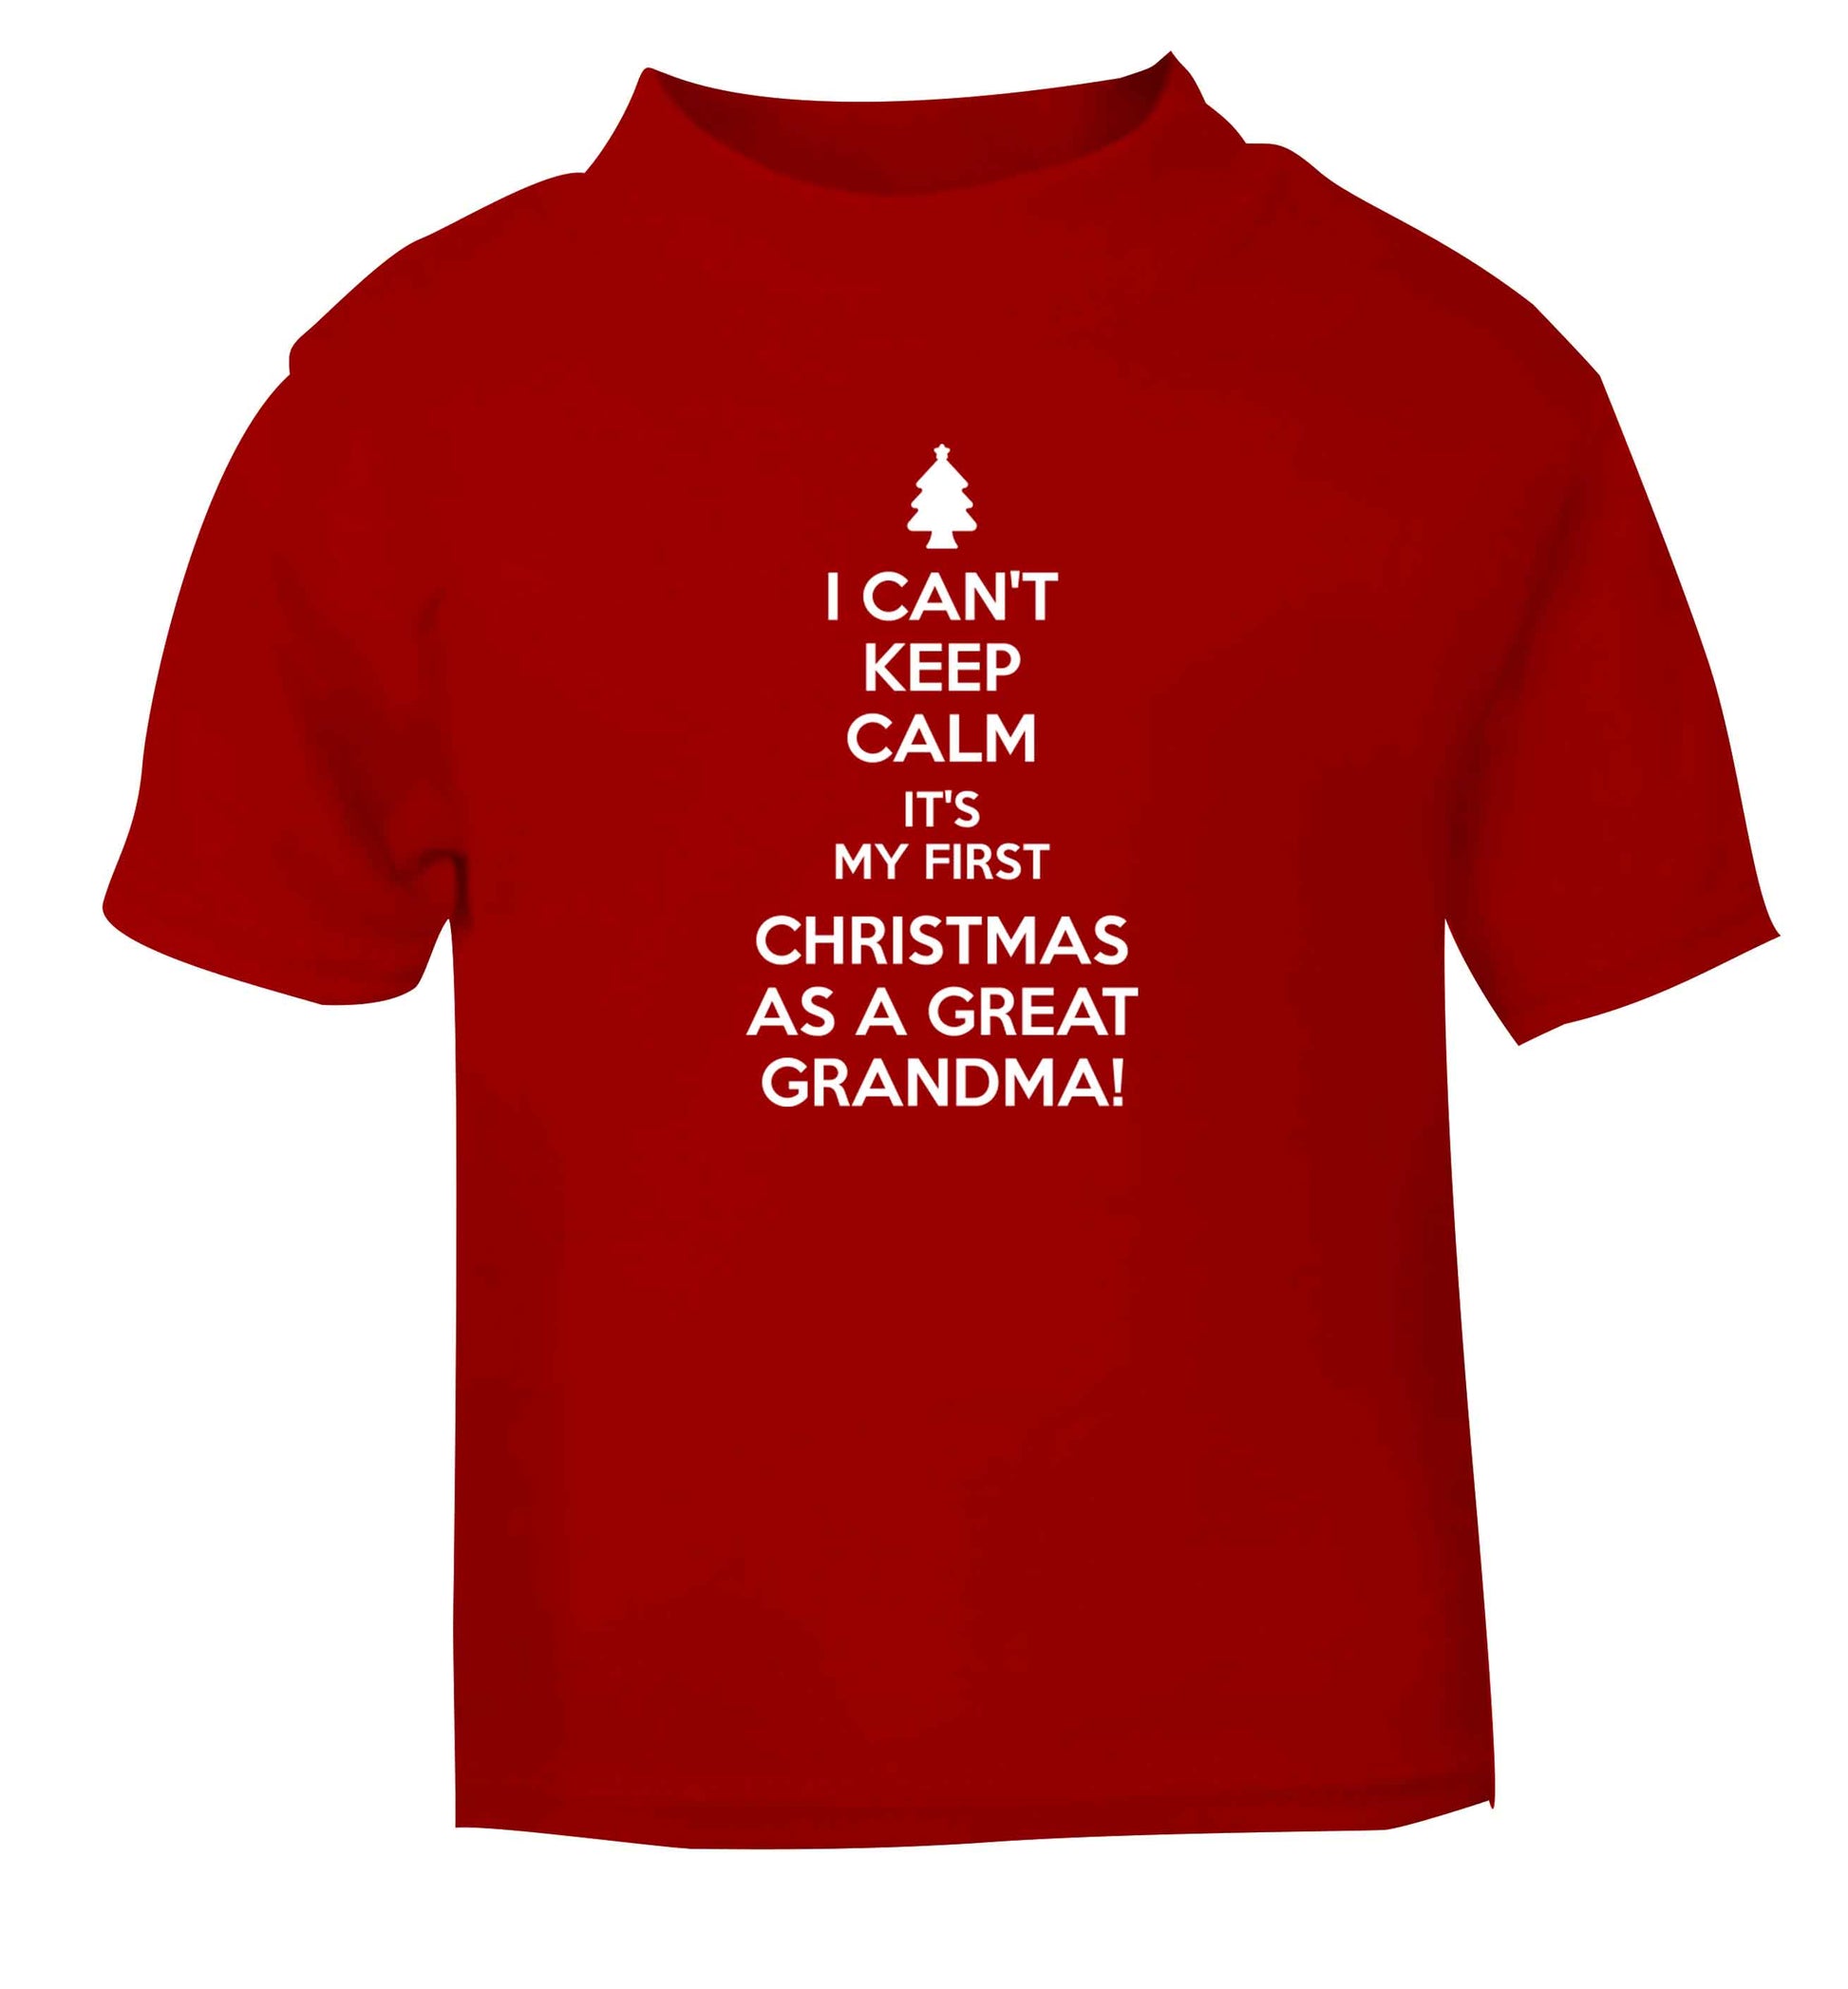 I can't keep calm it's my first Christmas as a great grandma! red Baby Toddler Tshirt 2 Years